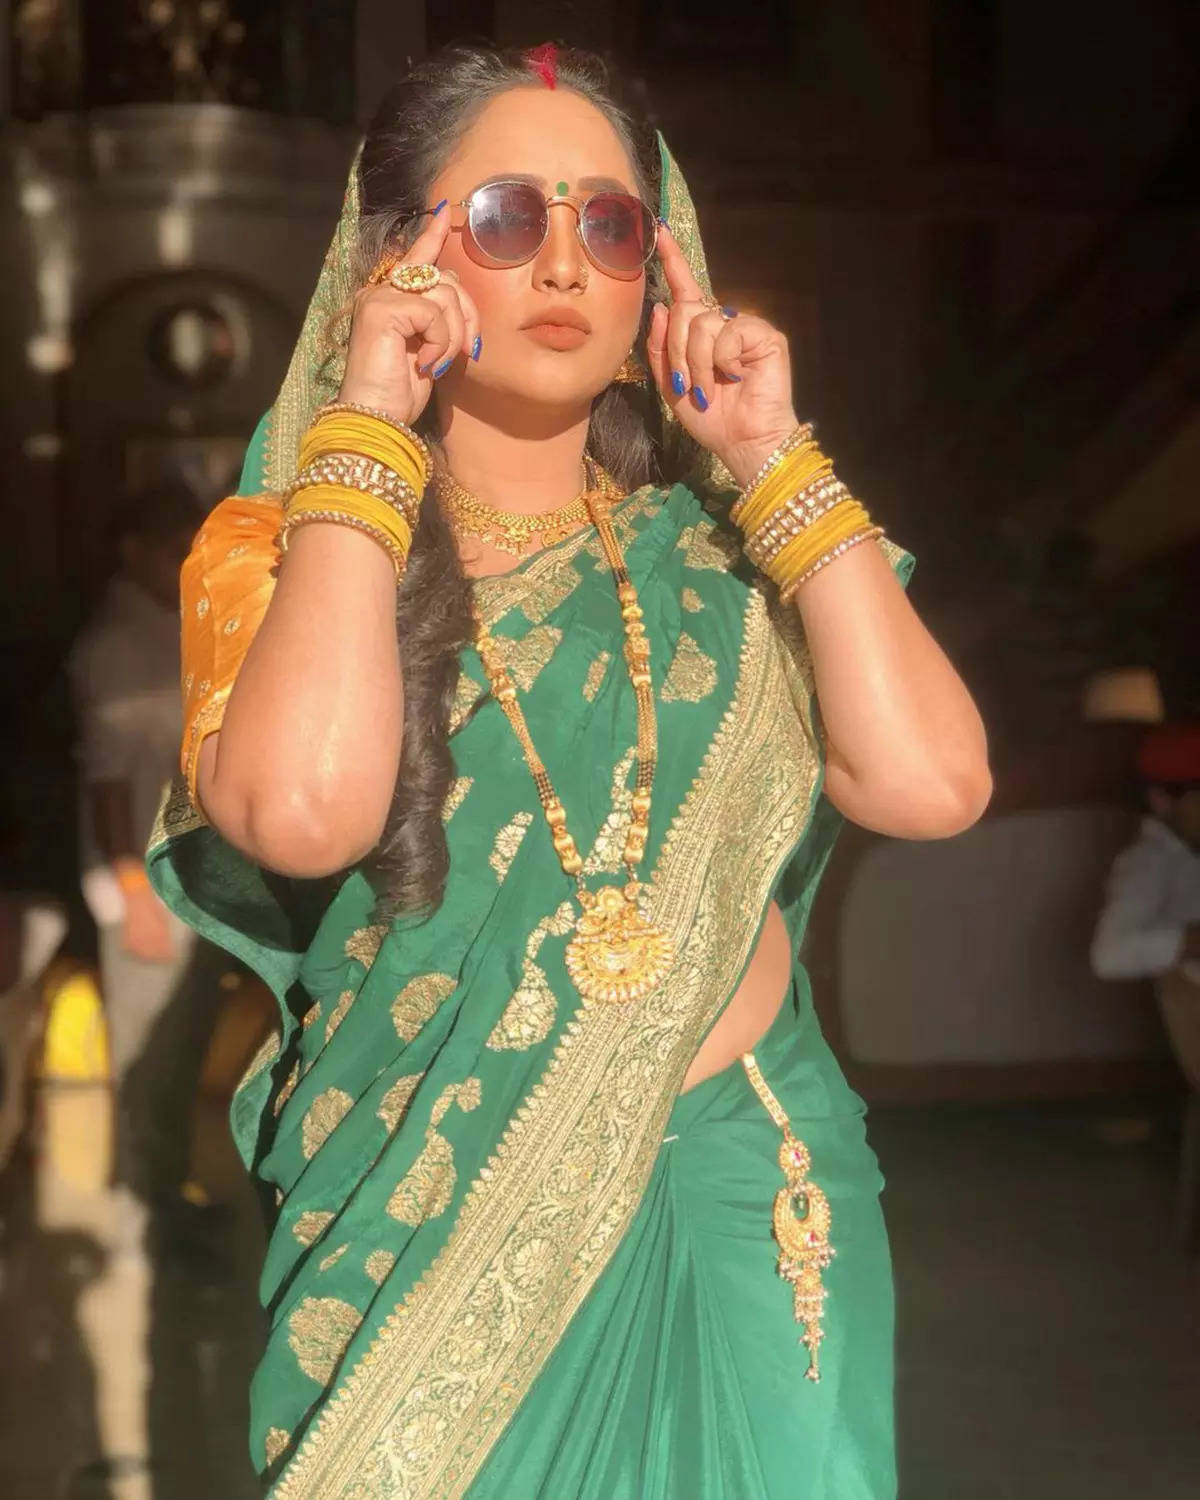 Rani Chatterjee Impresses With Her Stunning Choice Of Traditional Outfits Radiating Elegance